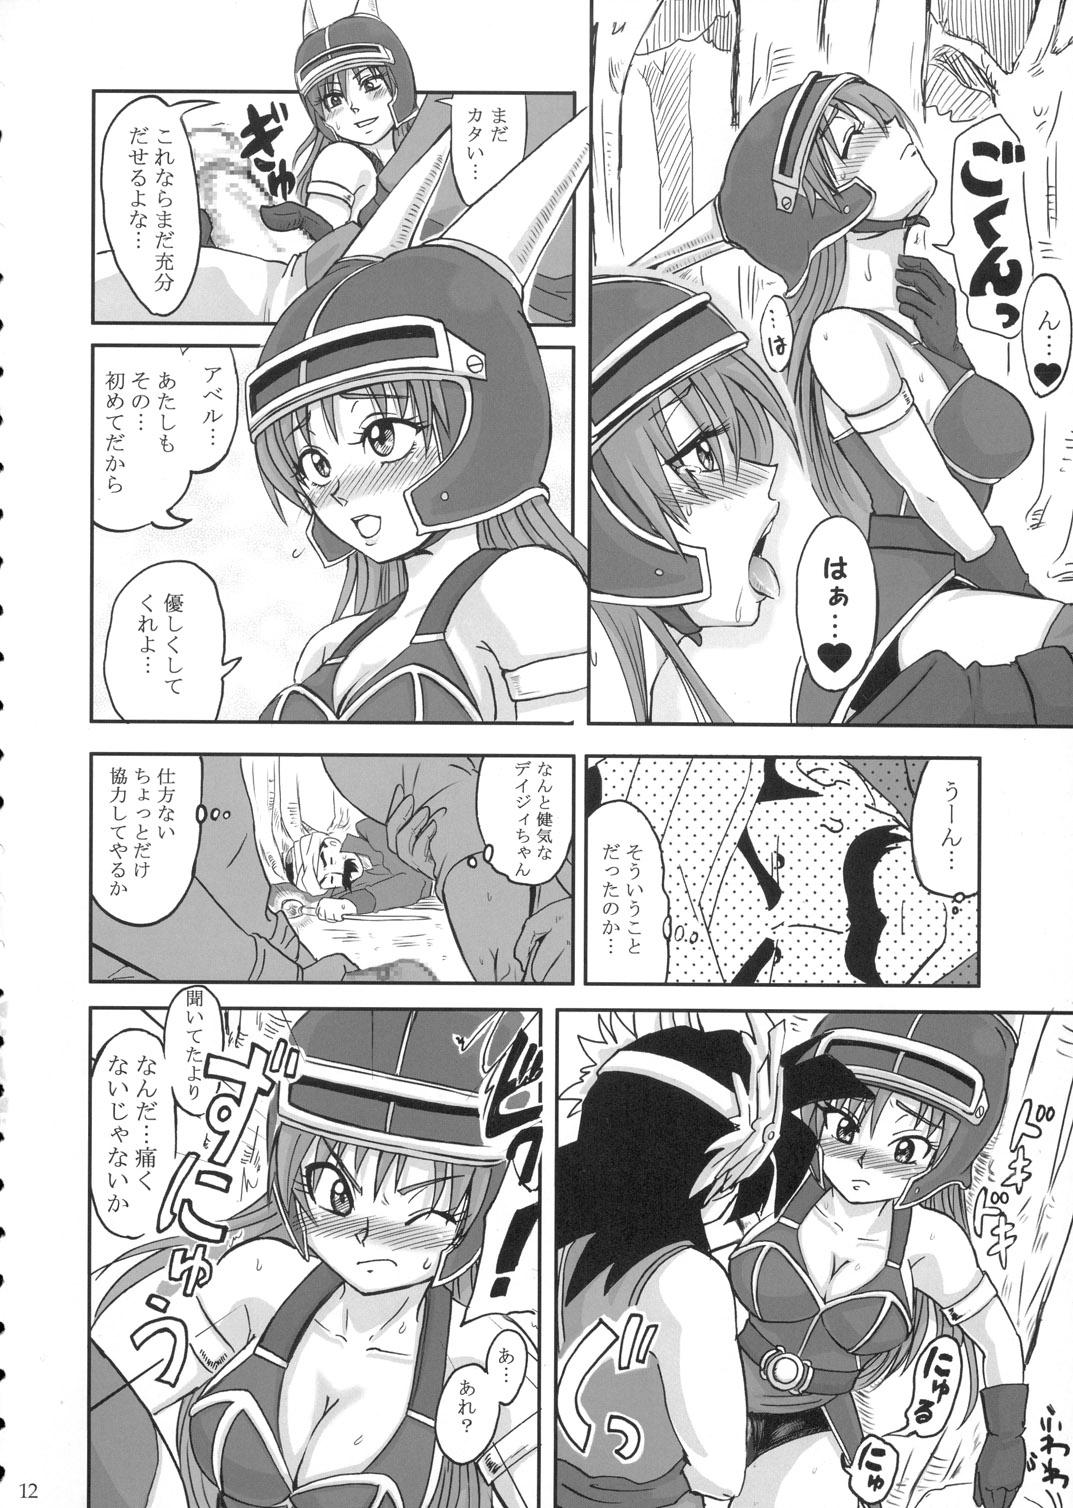 Tanned LoveLove Blue Daisy - Dragon quest yuusha abel densetsu Indonesian - Page 11